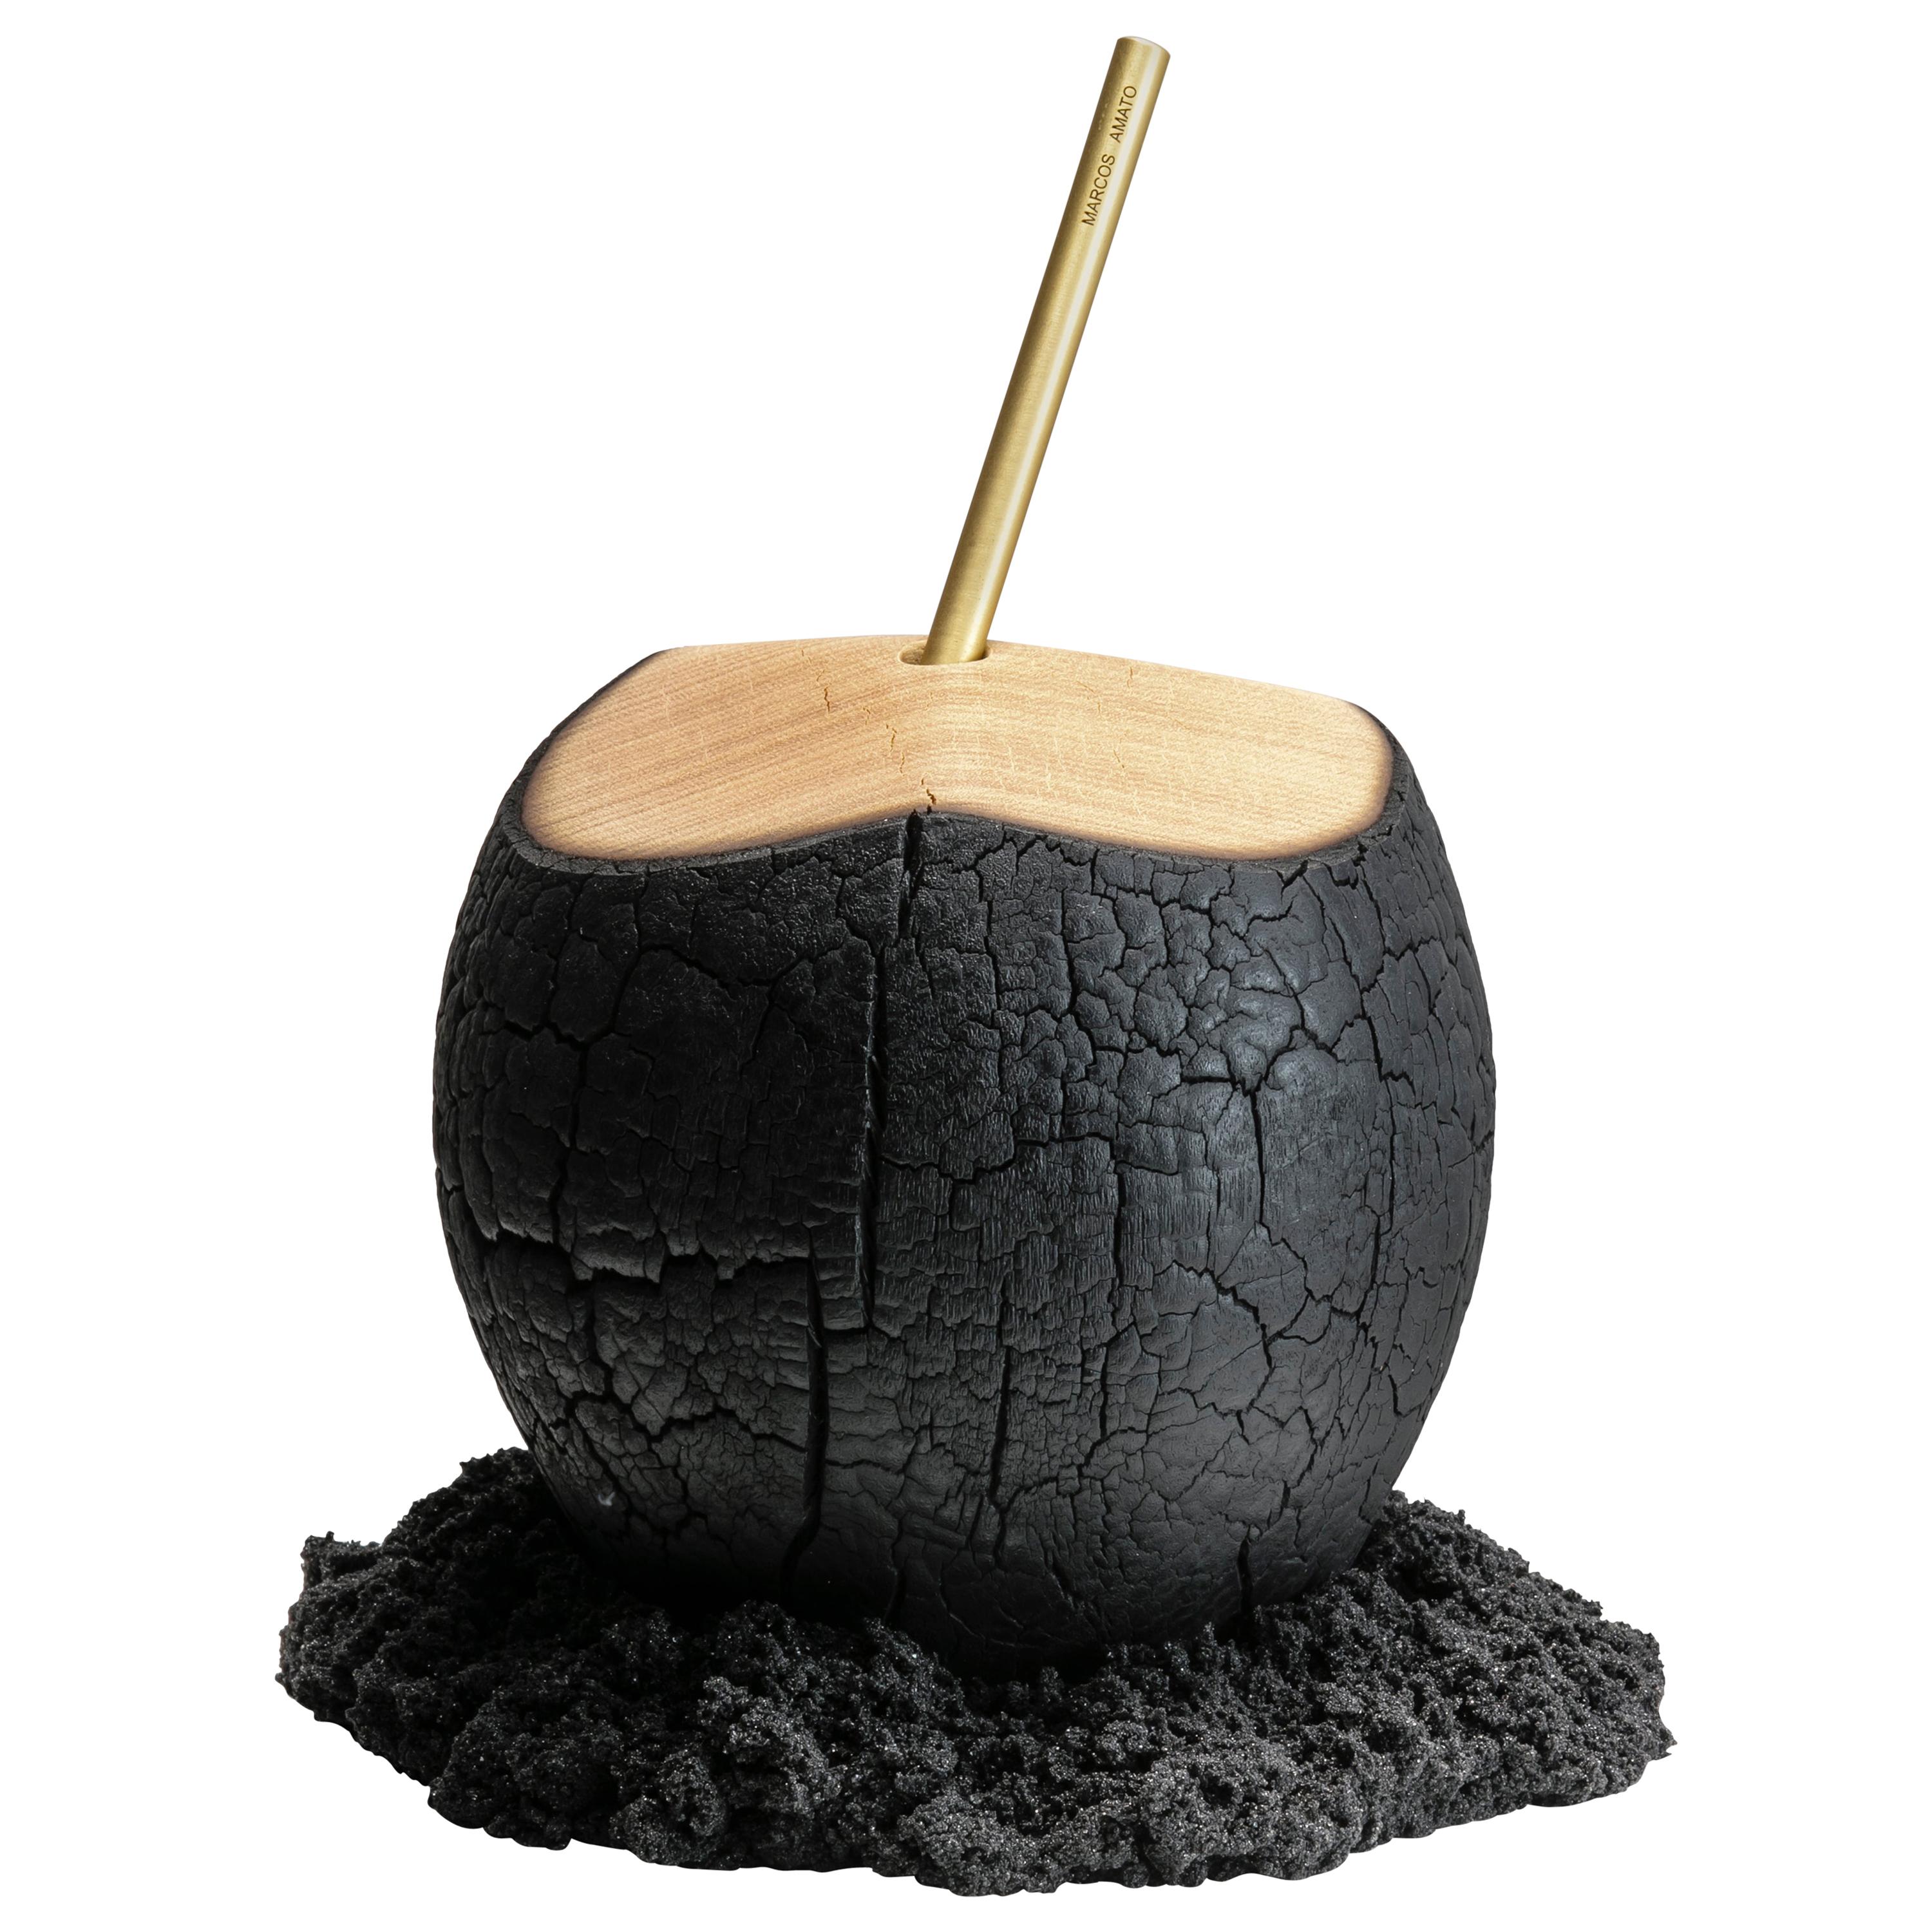 "Brasa" Contemporary Sculpture Coconut by Marcos Amato, Limited Edition For Sale